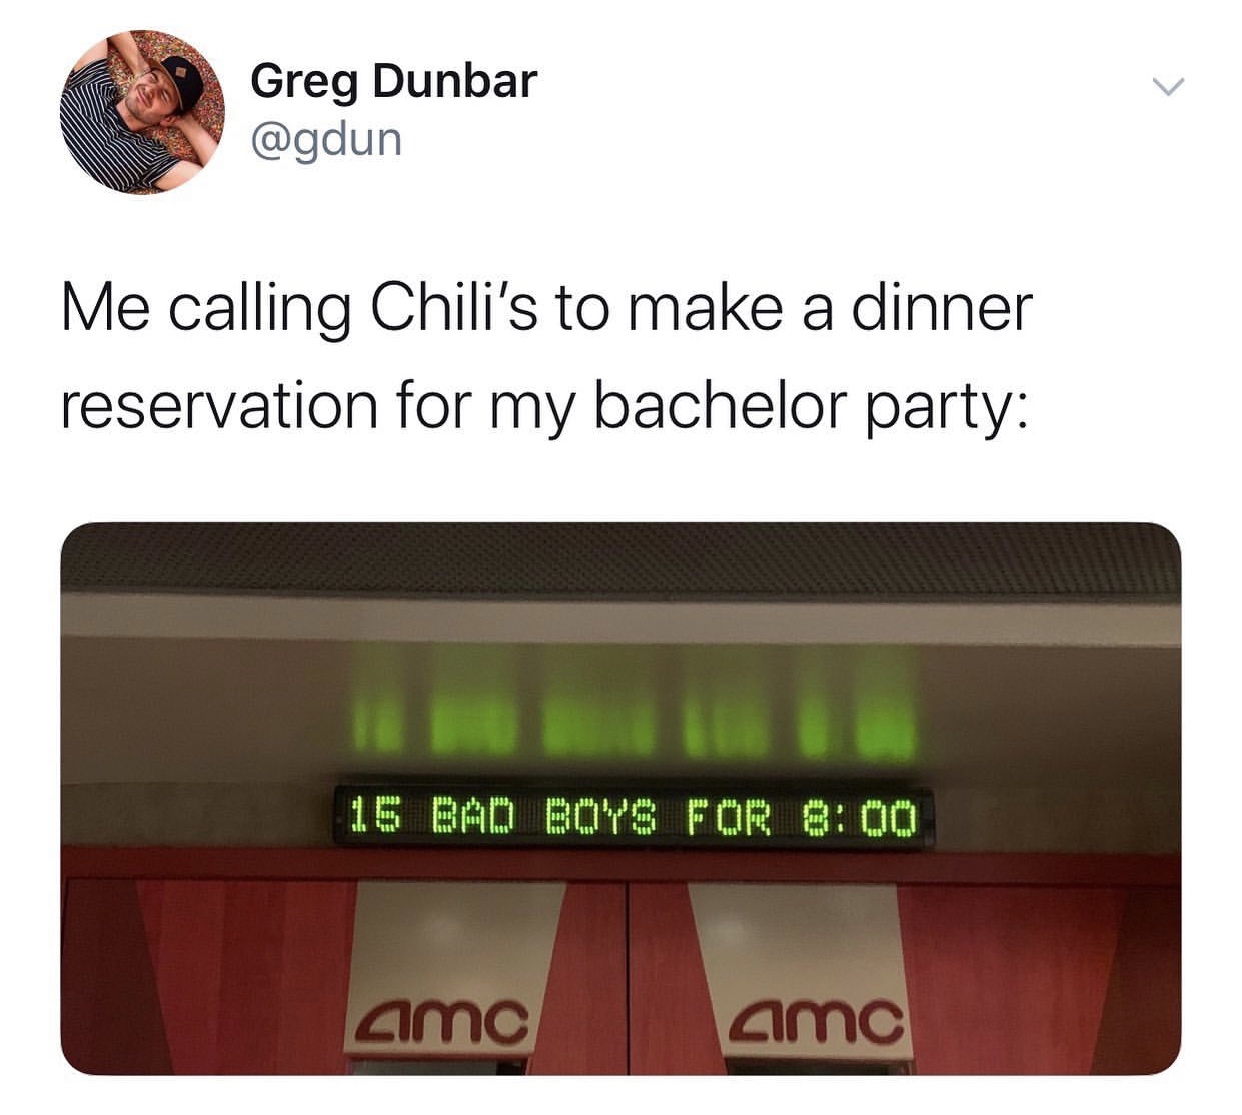 multimedia - Greg Dunbar Me calling Chili's to make a dinner reservation for my bachelor party 15 Bad Boys For c amc